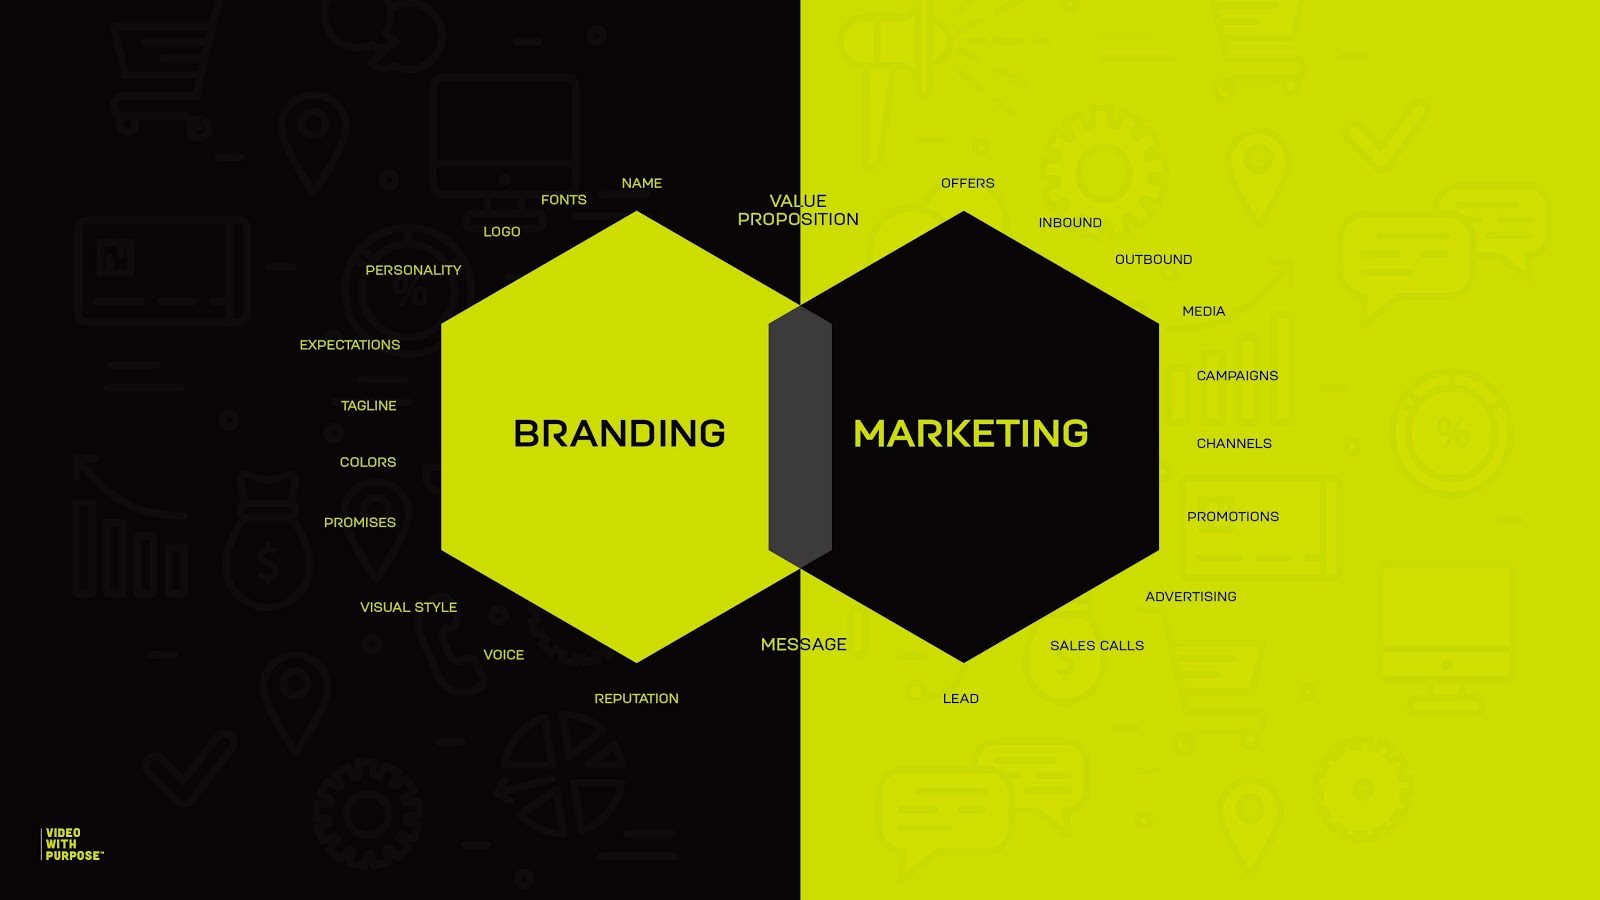 How Marketing and Branding Work Together